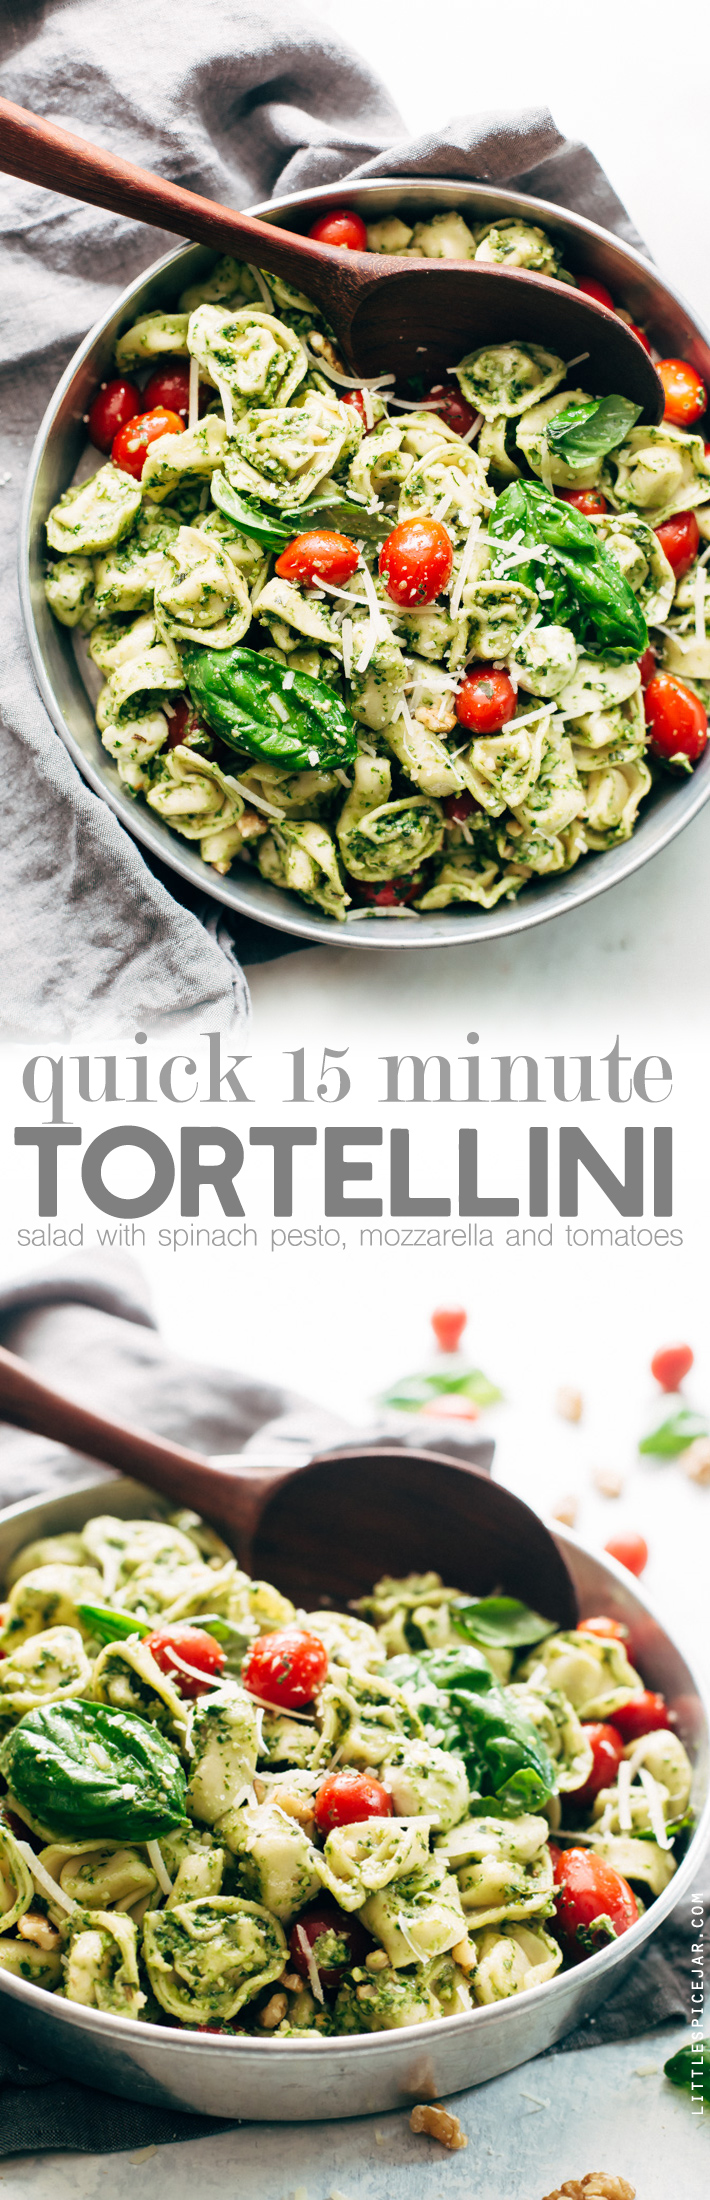 15 Minute Spinach Pesto Tortellini Salad - a quick and easy pasta salad that's perfect for picnics, potlucks, and barbecues! Ready in just 15 minutes! #tortellinisalad #pasta #pastasalad #spinachpesto | Littlespicejar.com